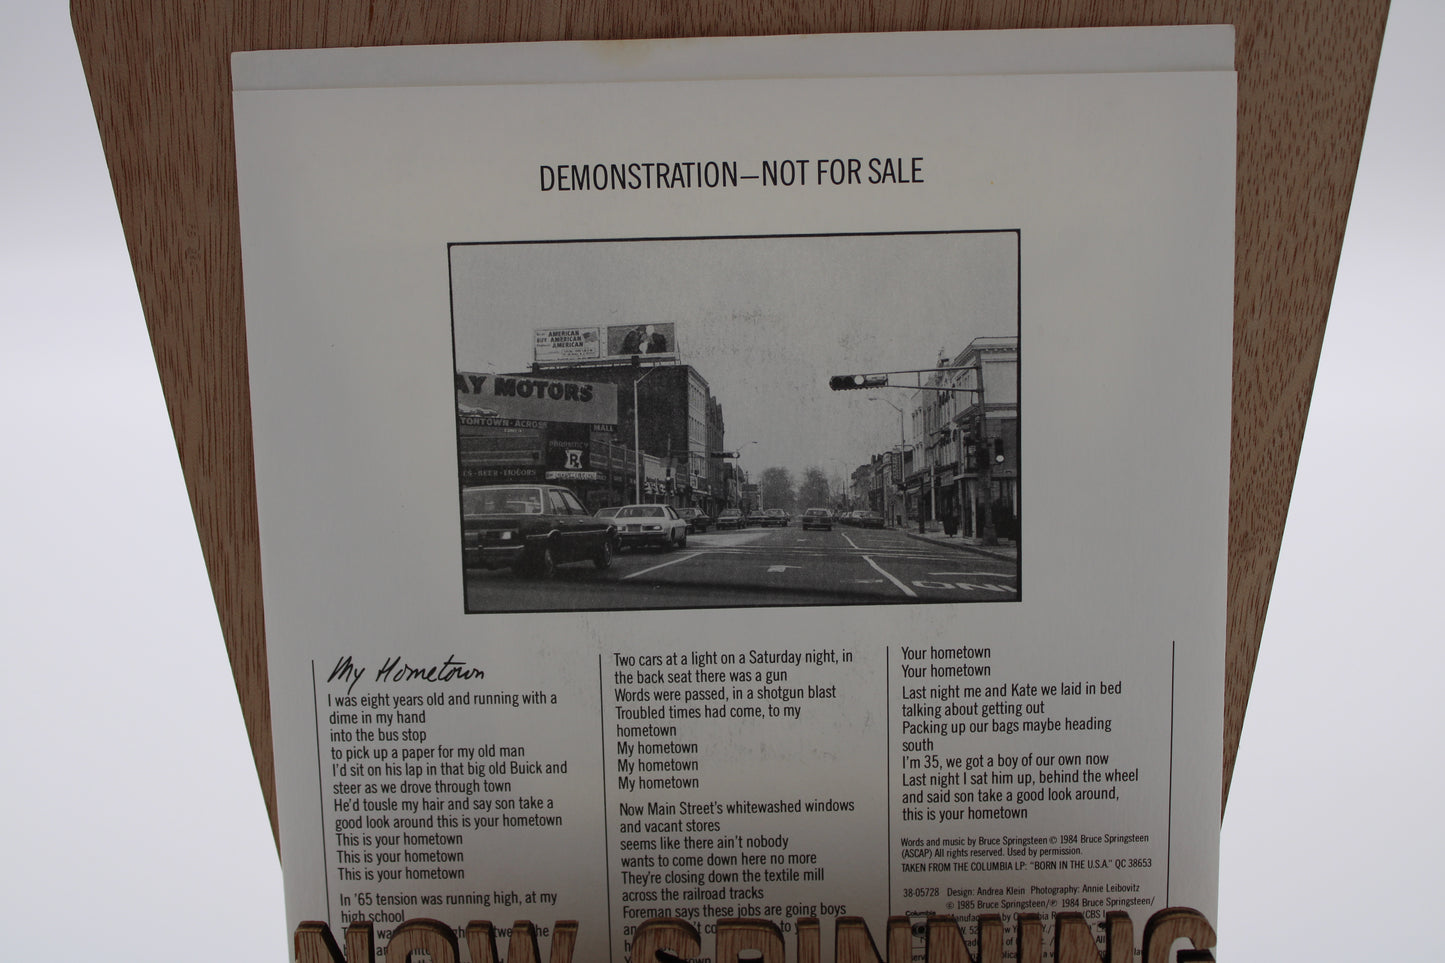 Bruce Springsteen - 45 Record - Promo "Demonstration Not For Sale" My Hometown